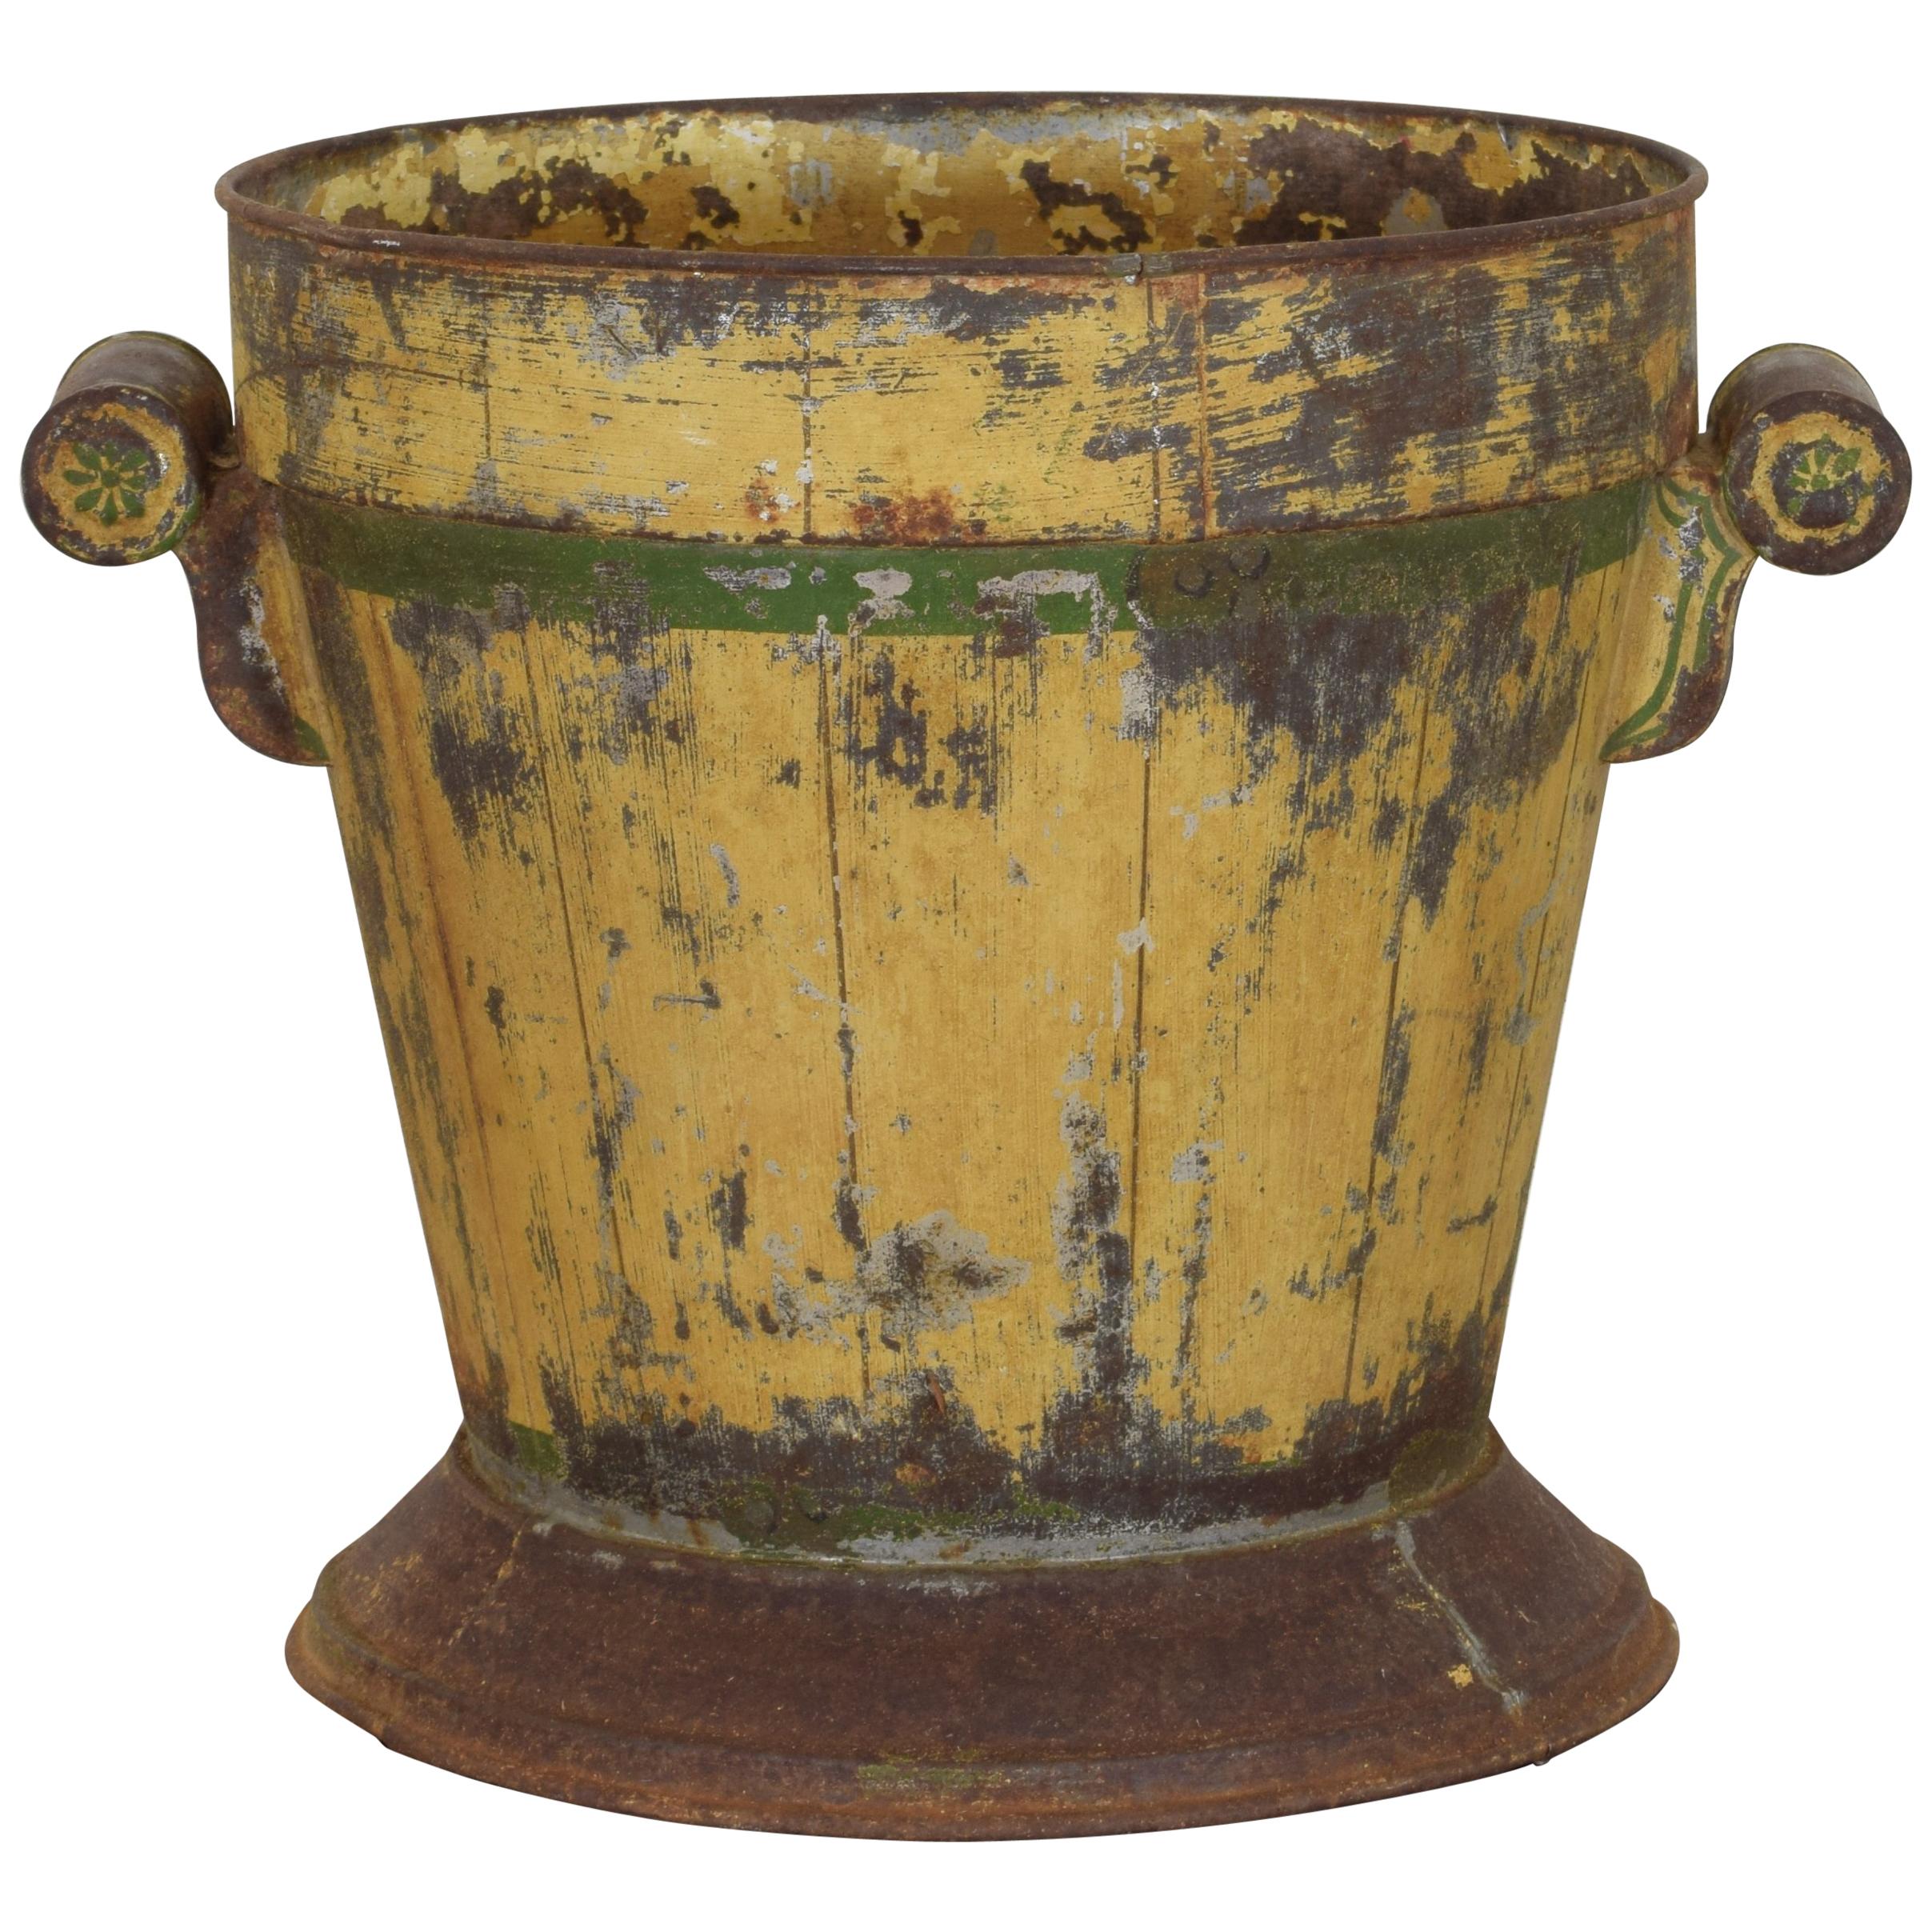 Italian Neoclassic Painted Tole Planter, Second Quarter of the 19th Century